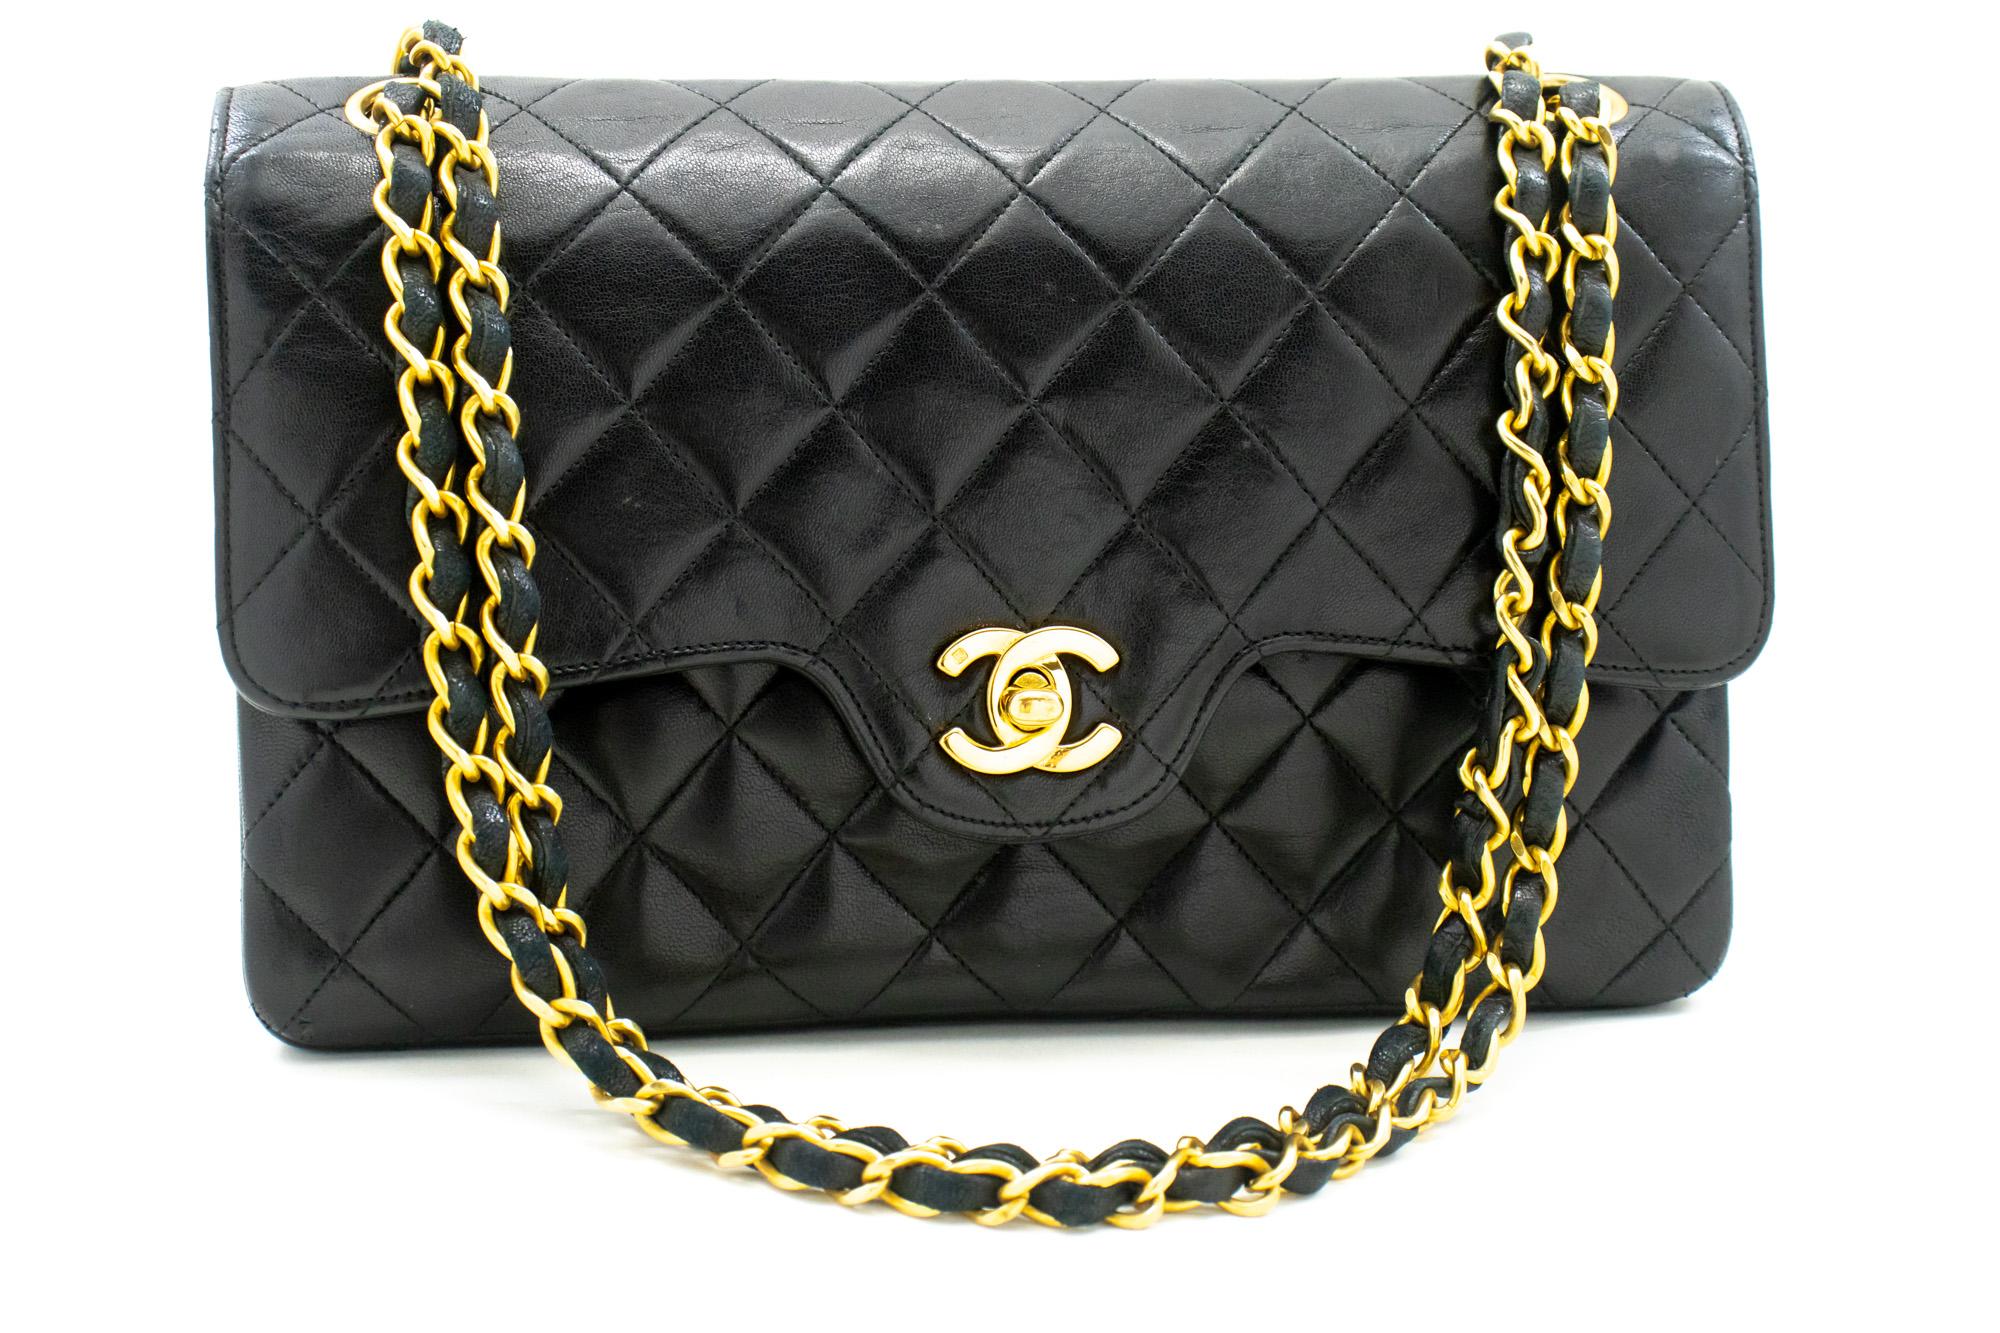 An authentic CHANEL Vintage Double Flap Medium Chain Shoulder Bag Black Lamb. The color is Black. The outside material is Leather. The pattern is Solid. This item is Vintage / Classic. The year of manufacture would be 1989-1991.
Conditions &